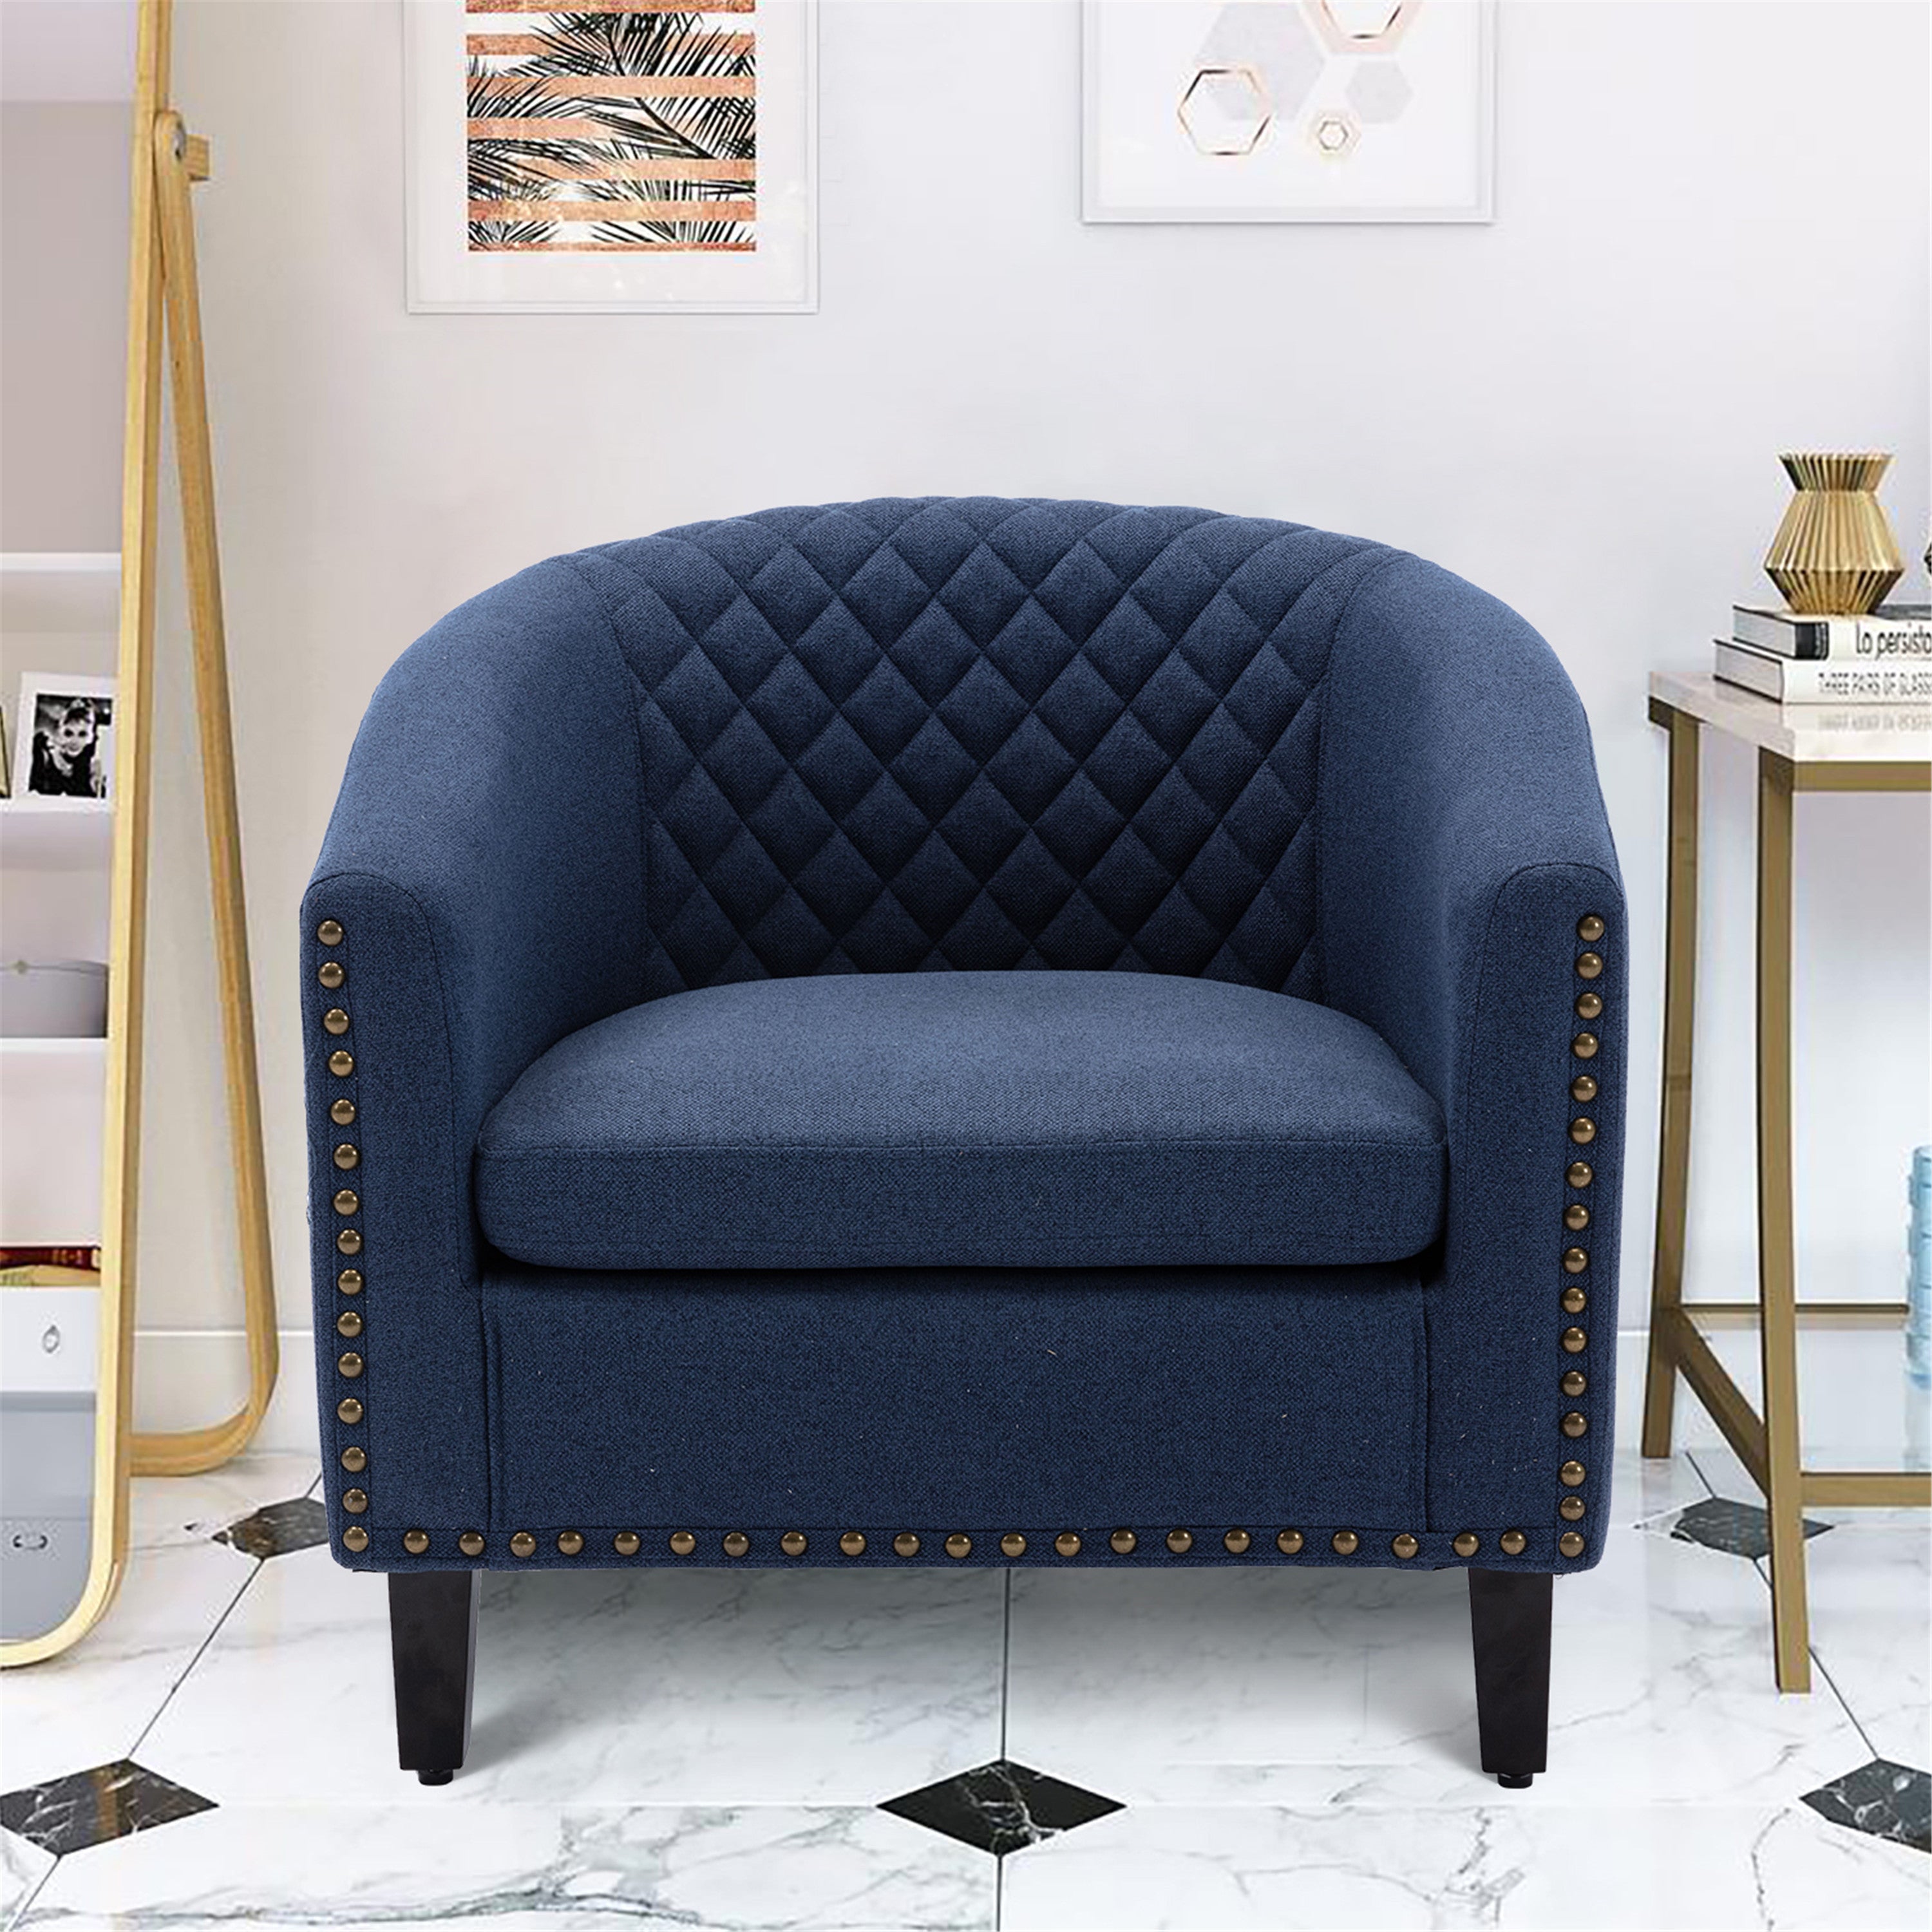 🆓🚛 Accent Barrel Chair Living Room Chair With Nailheads and Solid Wood Legs, Black Navy Linen